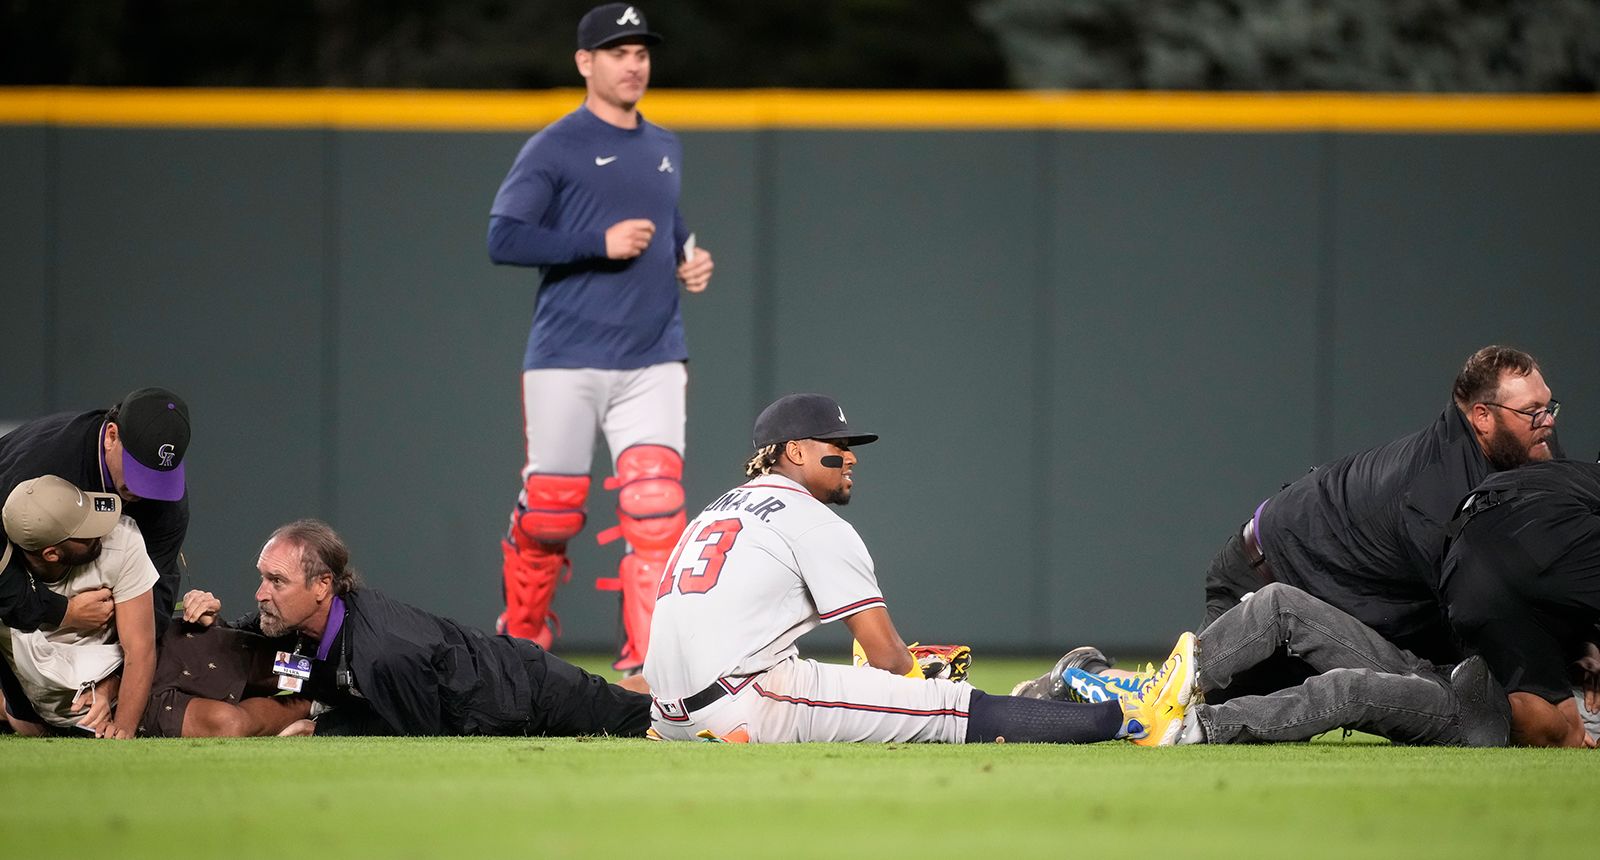 After the Braves Let the Kid Play, Ronald Acuña Jr. Soared - The